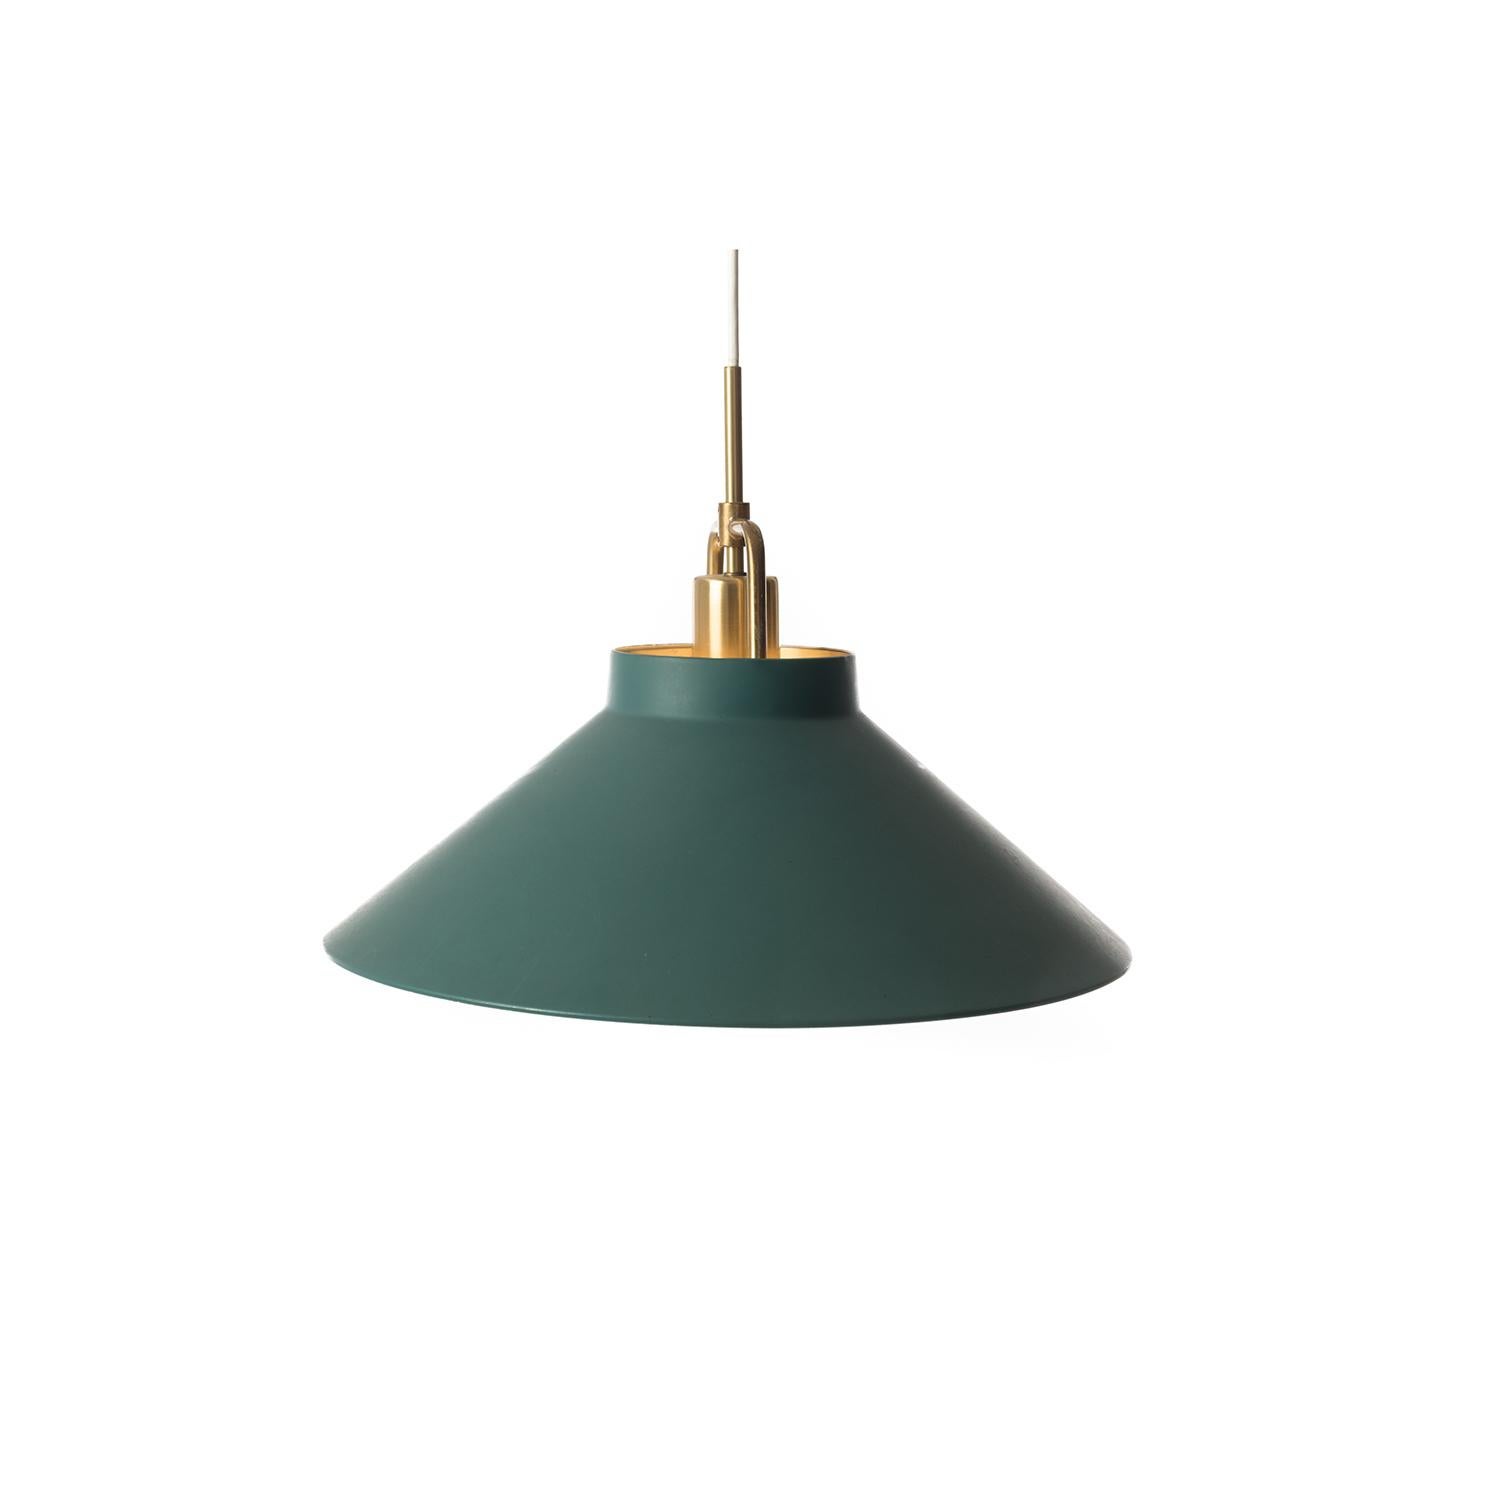 This pendant fixture is a club room classic that could be applied to any number of updated environments, if you don’t have a designated card-playing or puzzle room. Updated with North American wiring and can accommodate a 100 watt bulb. Fixture is